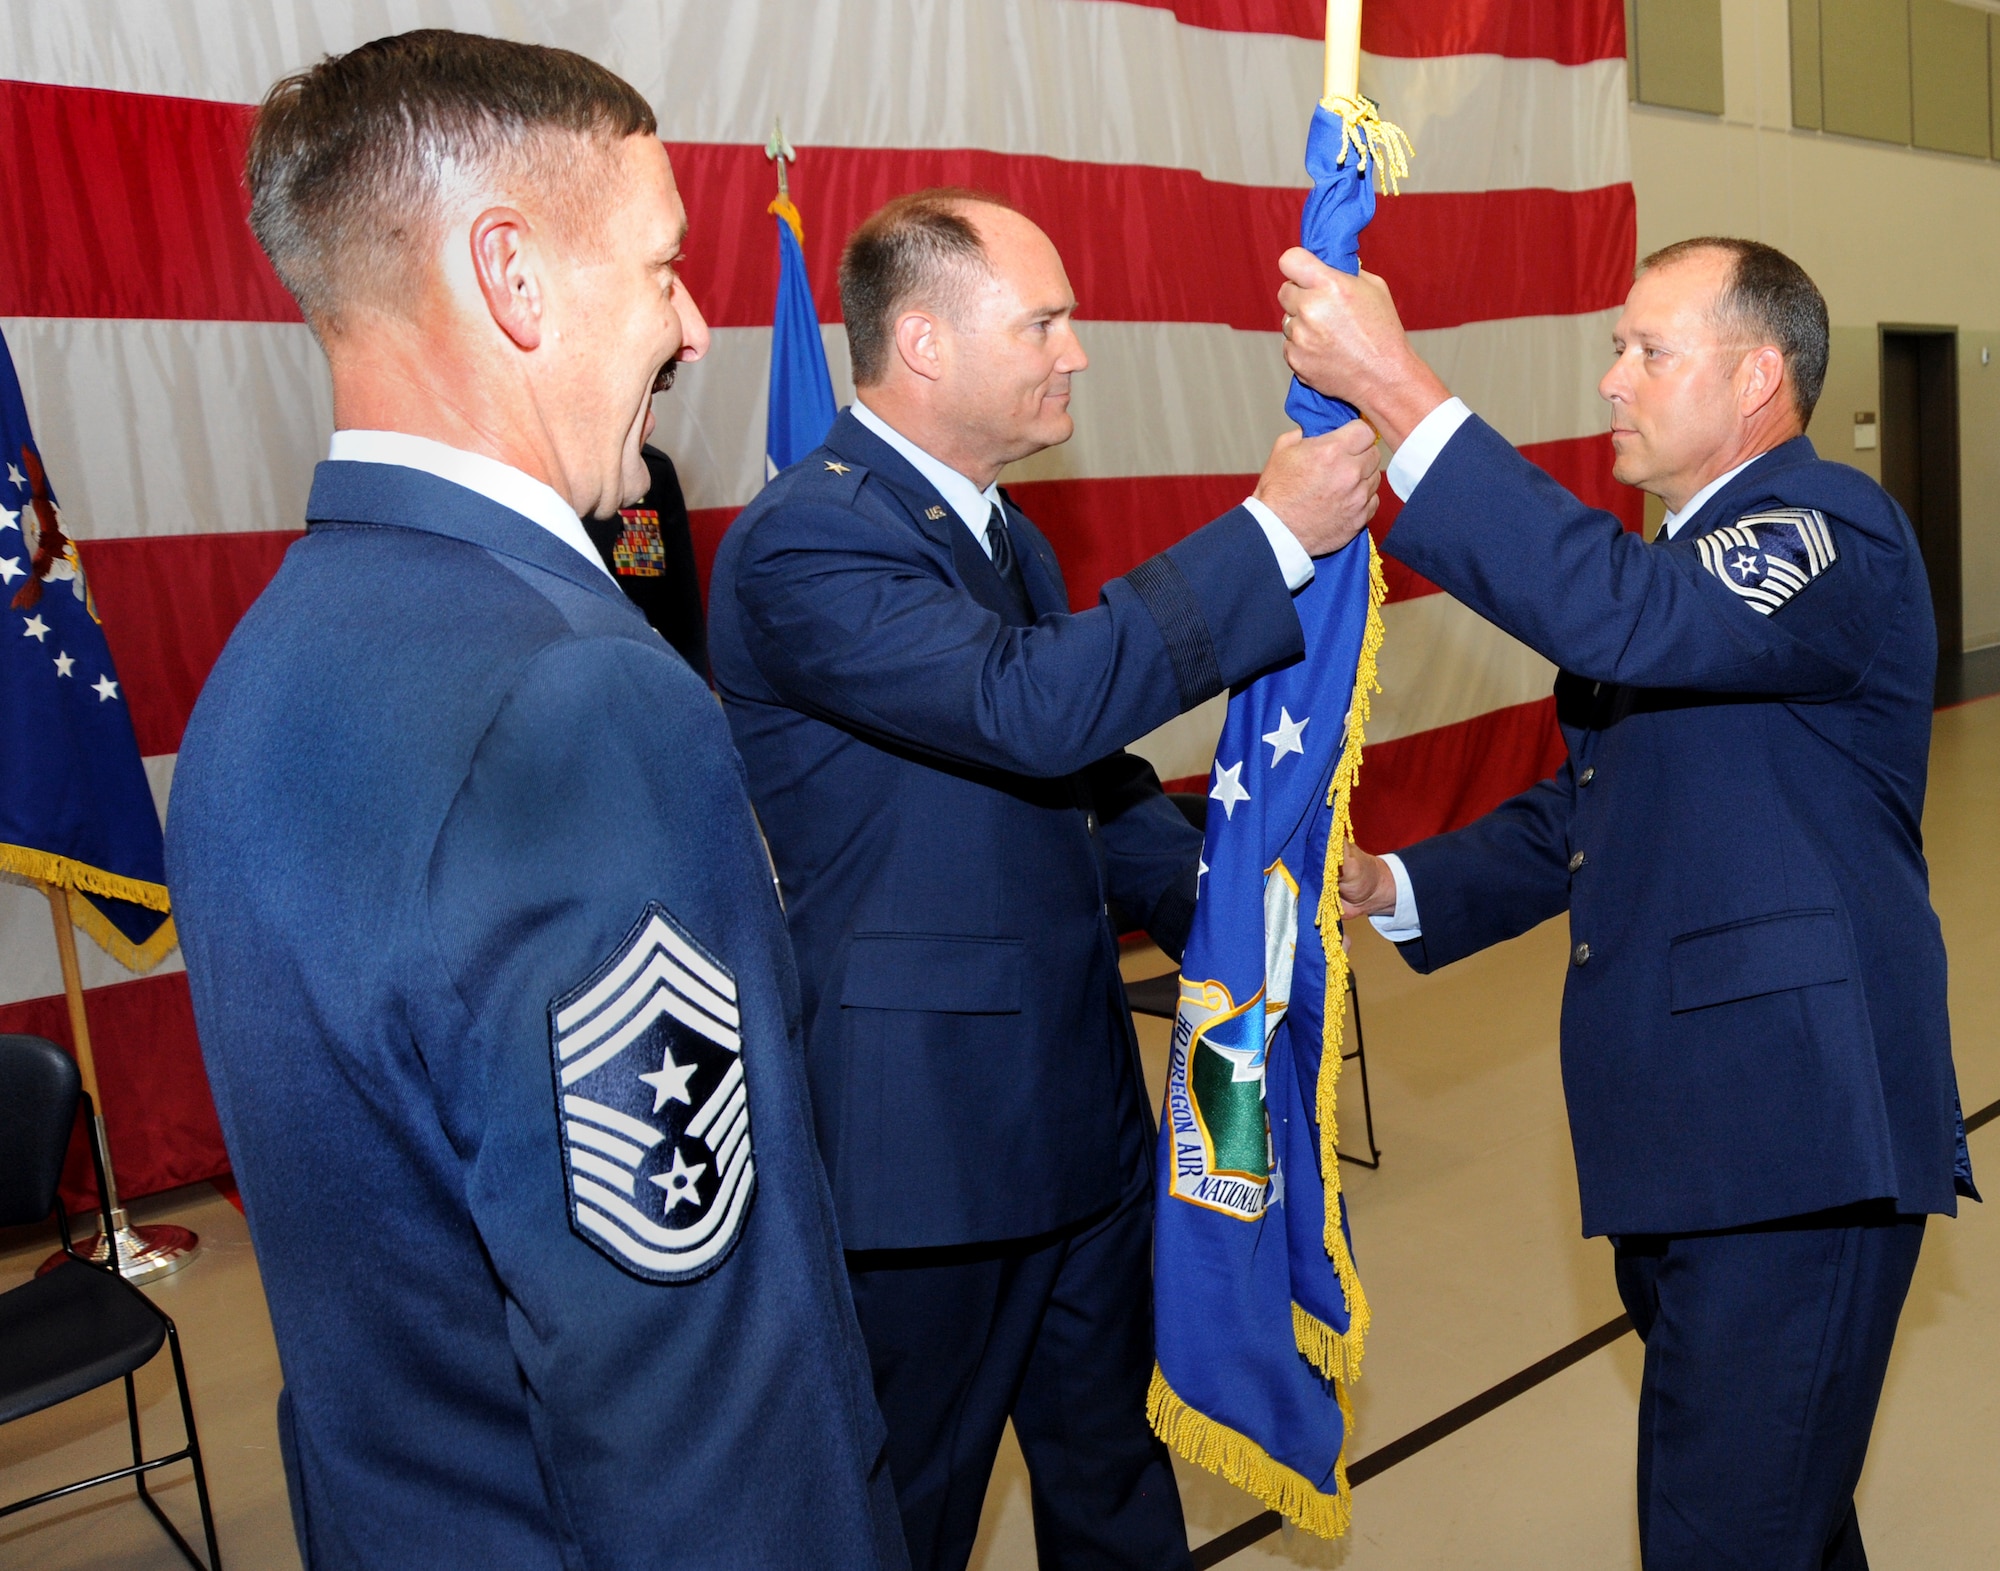 Command Chief Master Sgt. Mark Russell (left) watches Brig. Gen. Michael Stencel pass the colors of the Oregon Air National Guard Flag to Chief Master Sgt. Patrick “Andy” Gauntz, during the State Command Chief Change of Authority ceremony, held at the Anderson Readiness Center, Salem, Ore., Sept. 8, 2013. (Air National Guard photo by Tech. Sgt. John Hughel, 142nd Fighter Wing Public Affairs/Released)